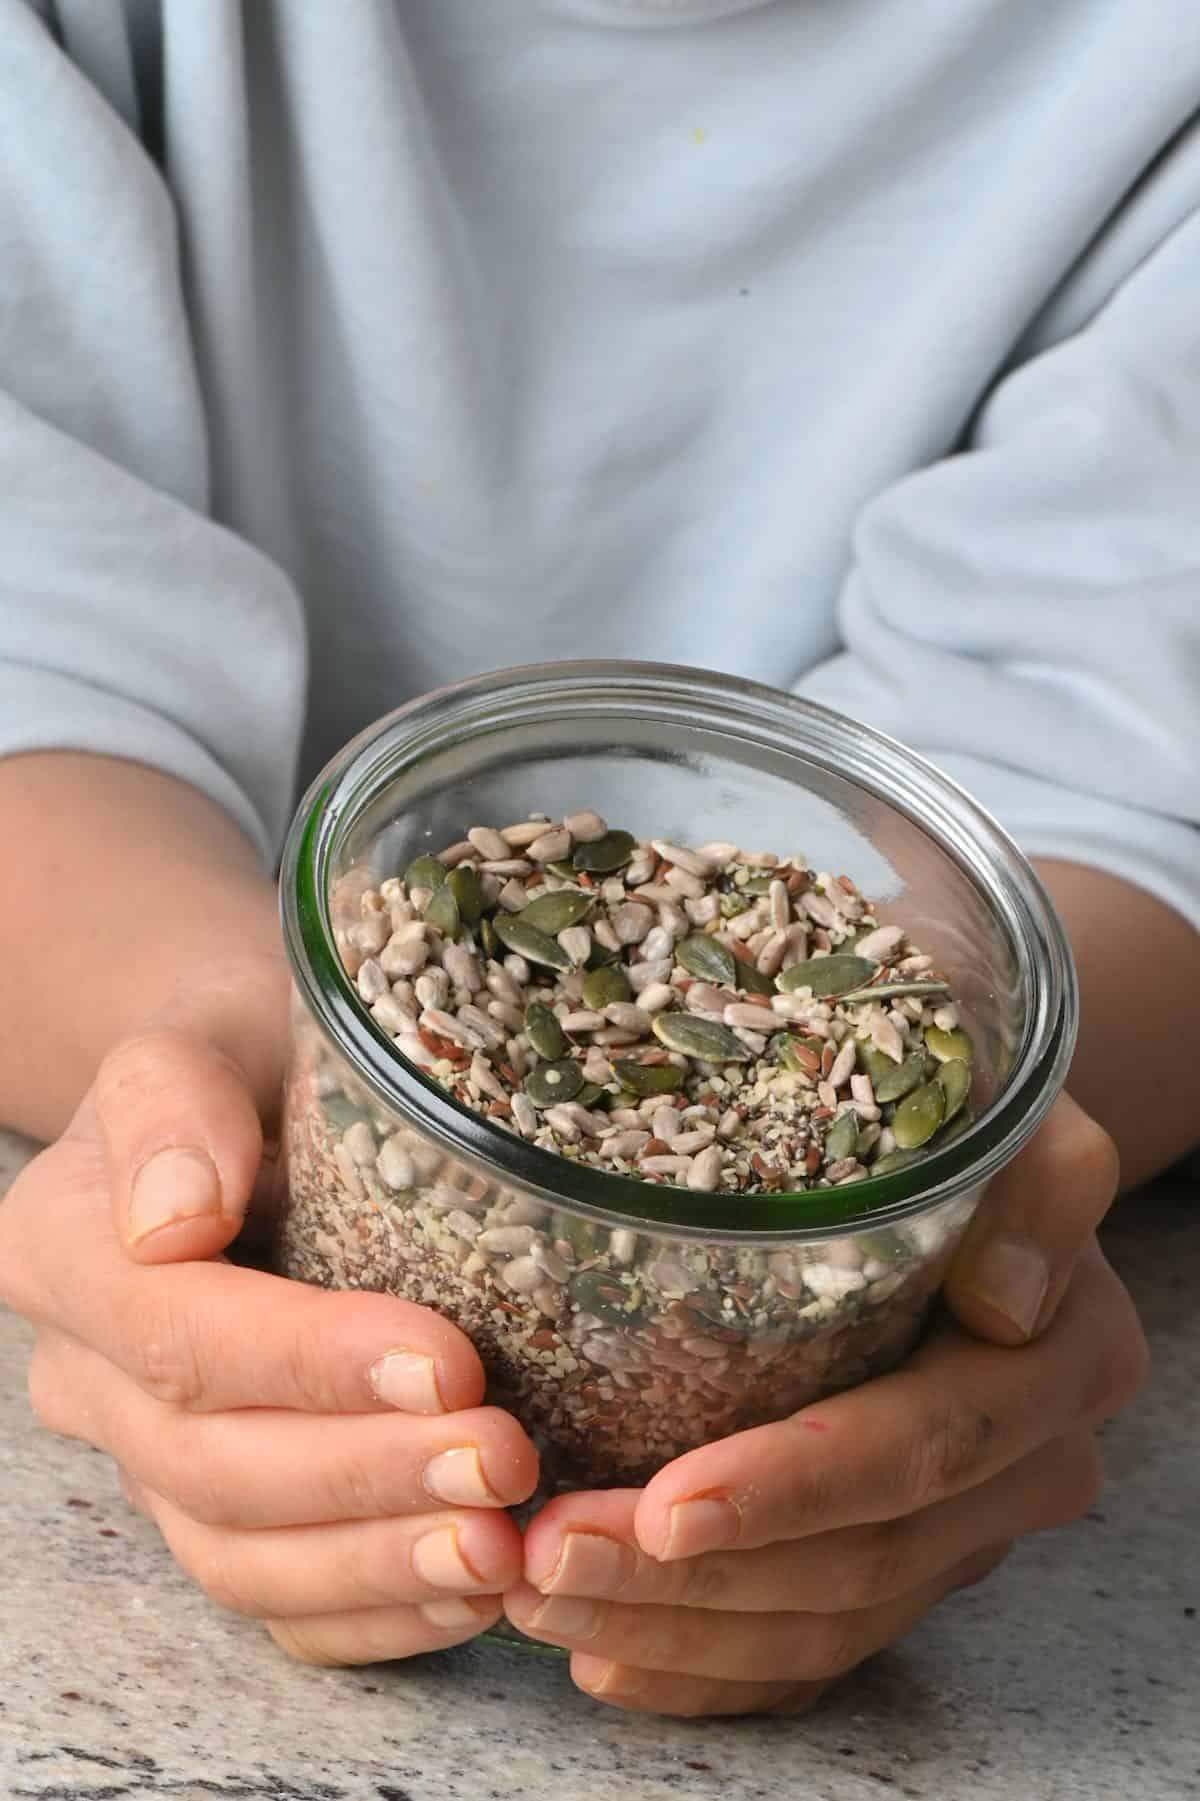 Holding a jar with omega seed mix